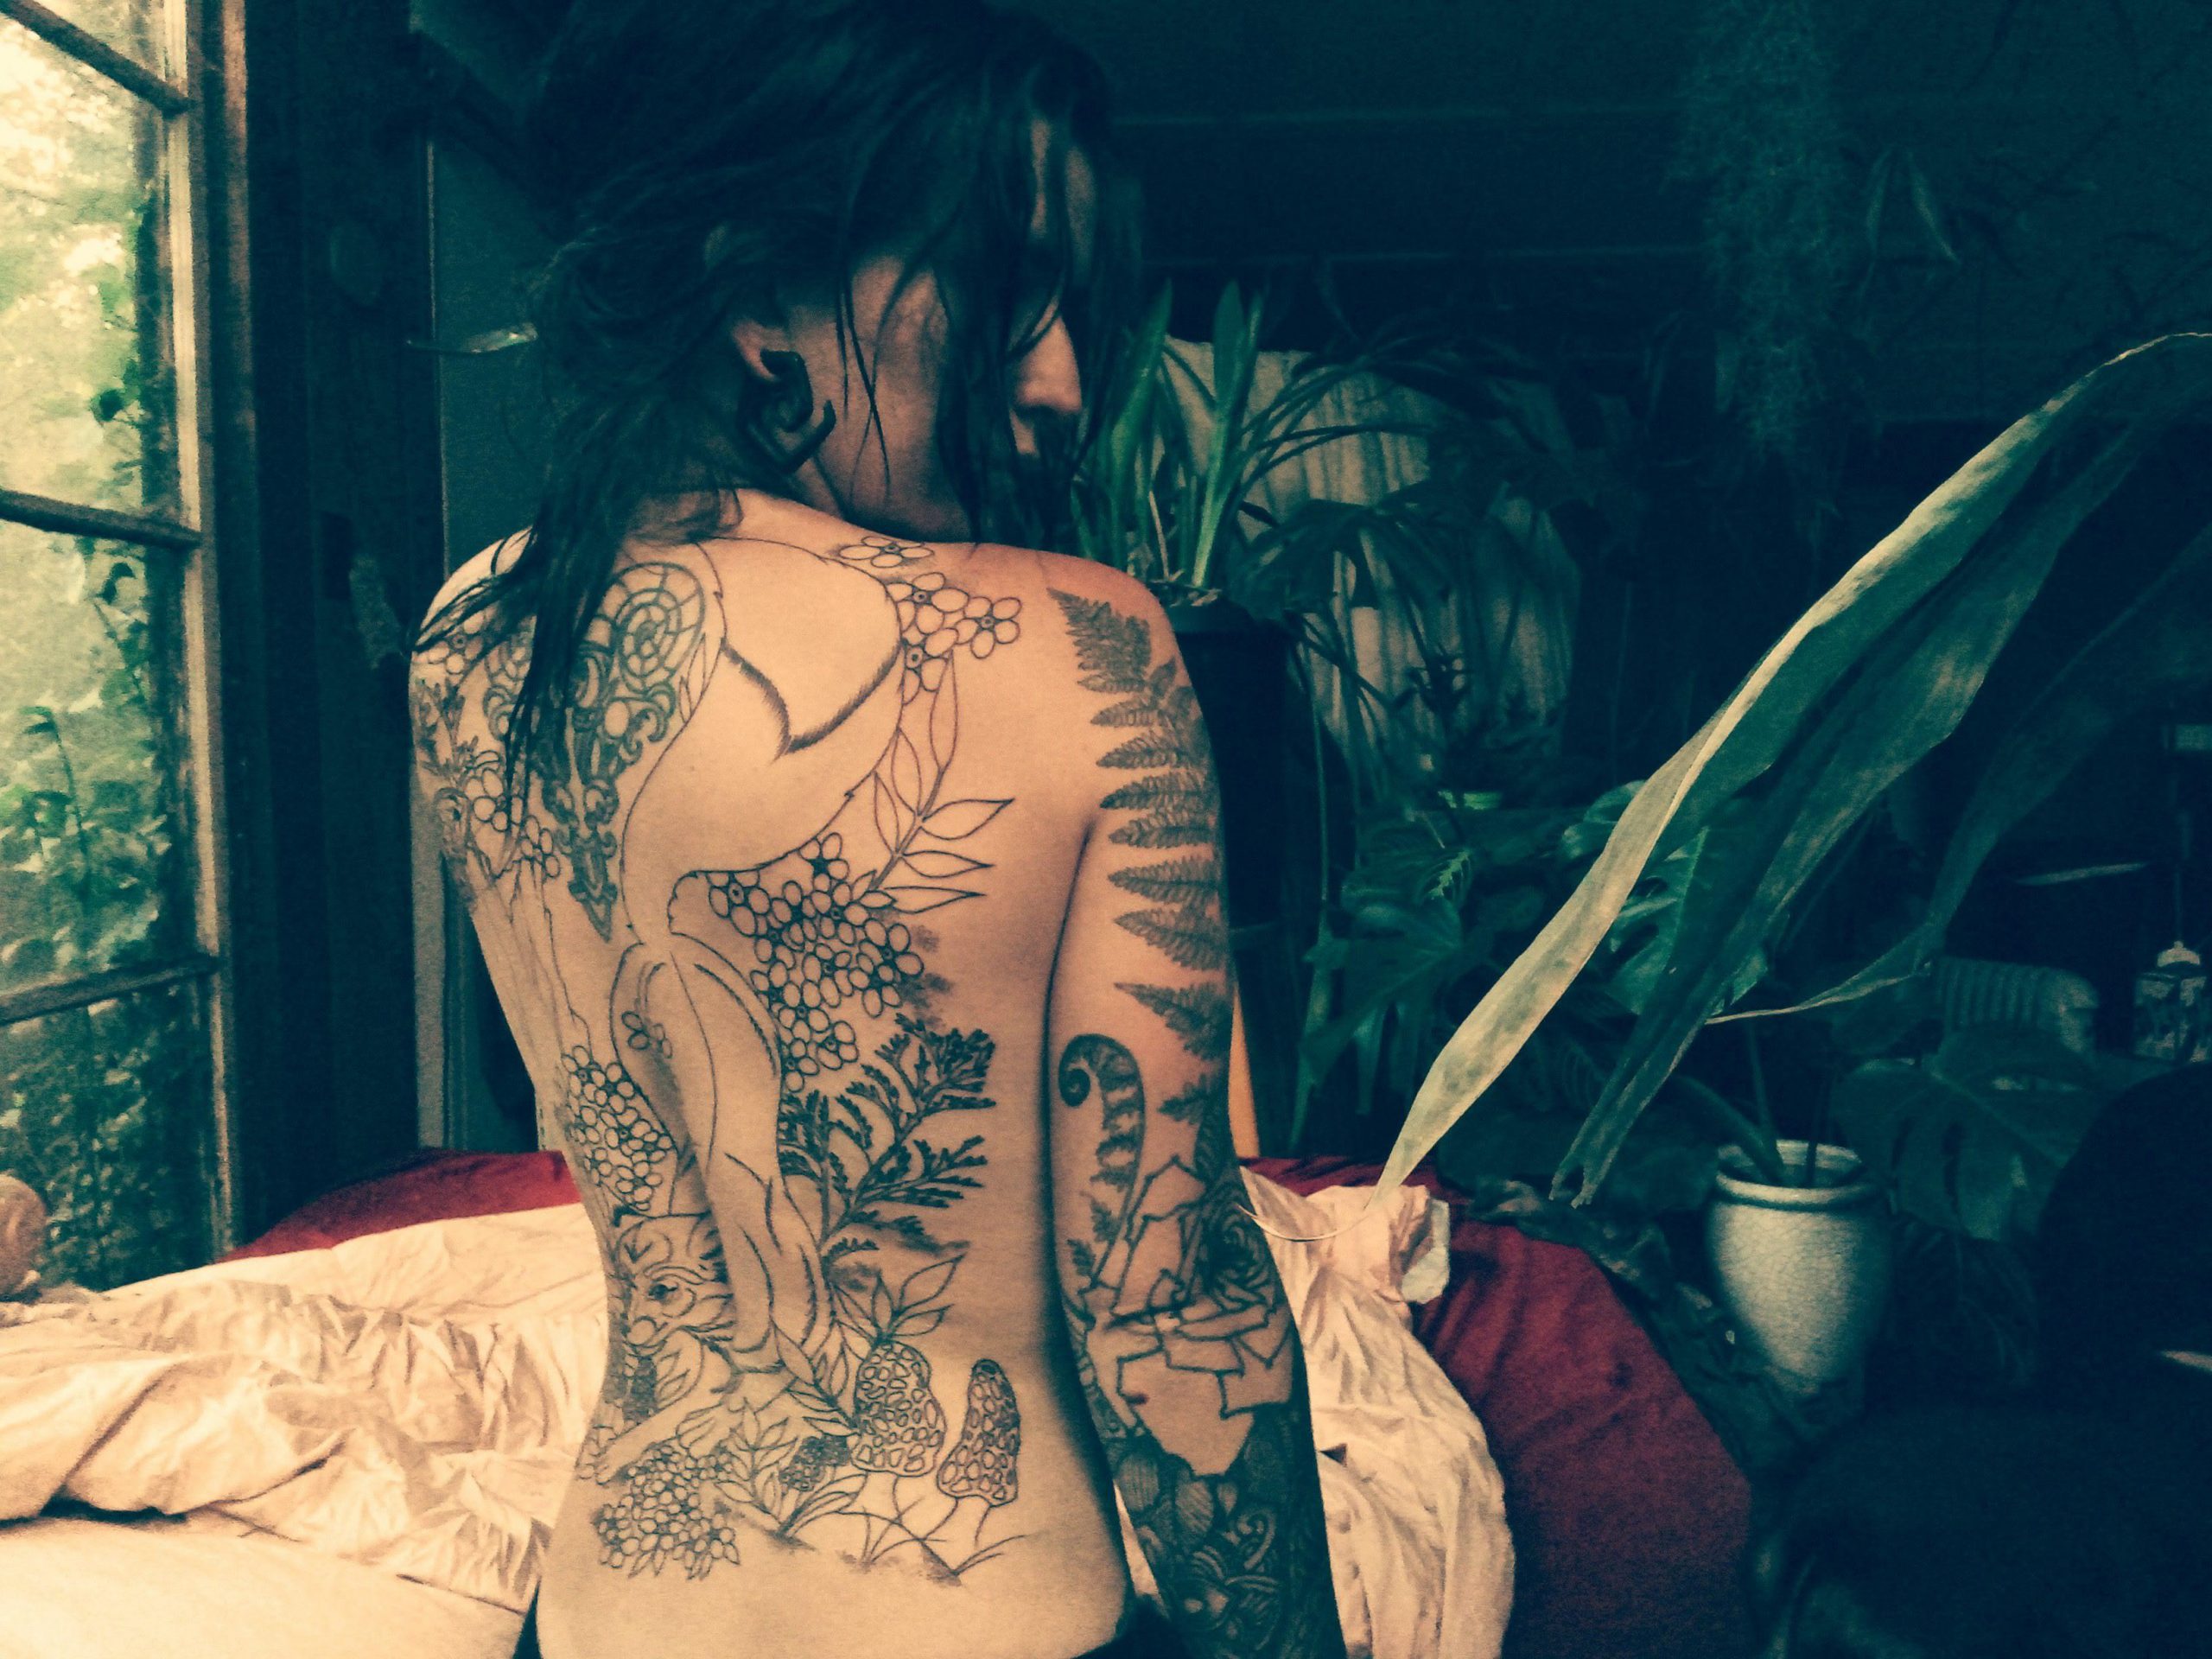 Do Yall Think I Should Do Any Color On My Back?